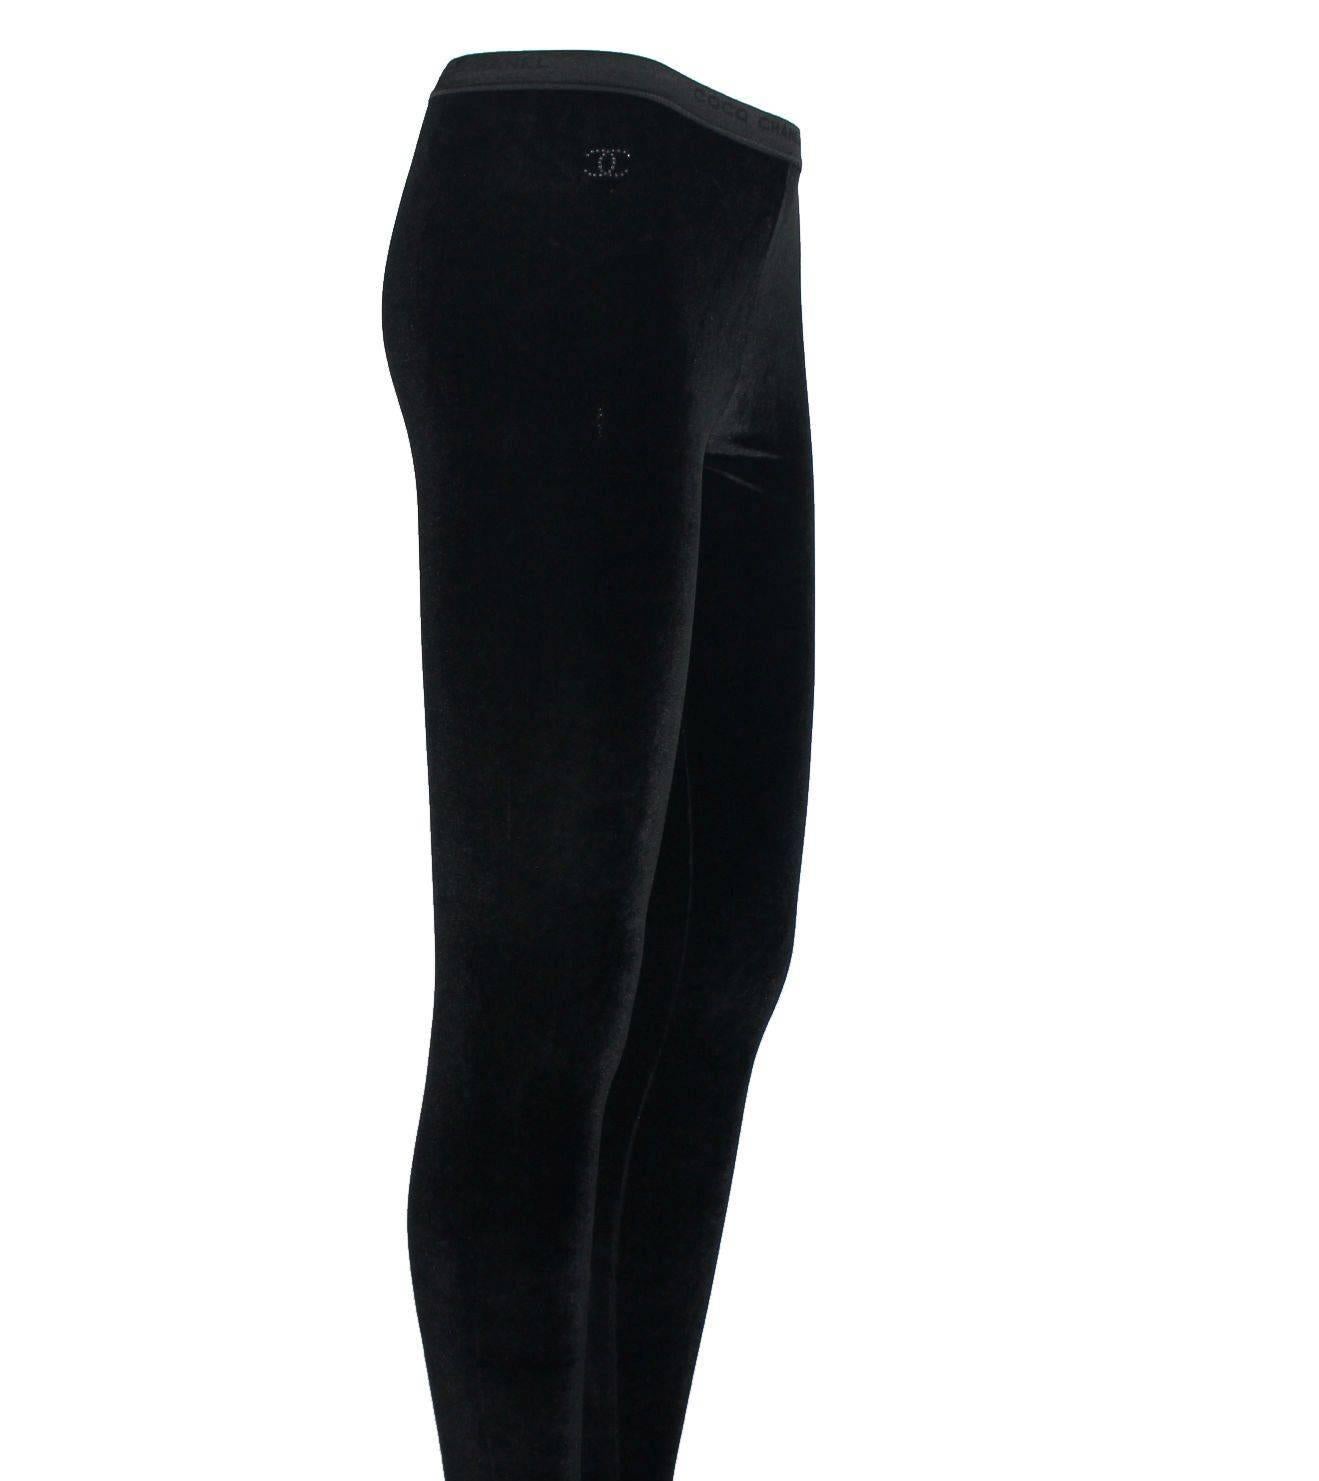 Gorgeous Chanel velvet footed leggings pants
A versatile add on to your wardrobe, it literally goes with any outfit
Luxurious shiny velvet
A classy item that lasts you for many years
So versatile - combine it with boots, a skirt, jacket, dress